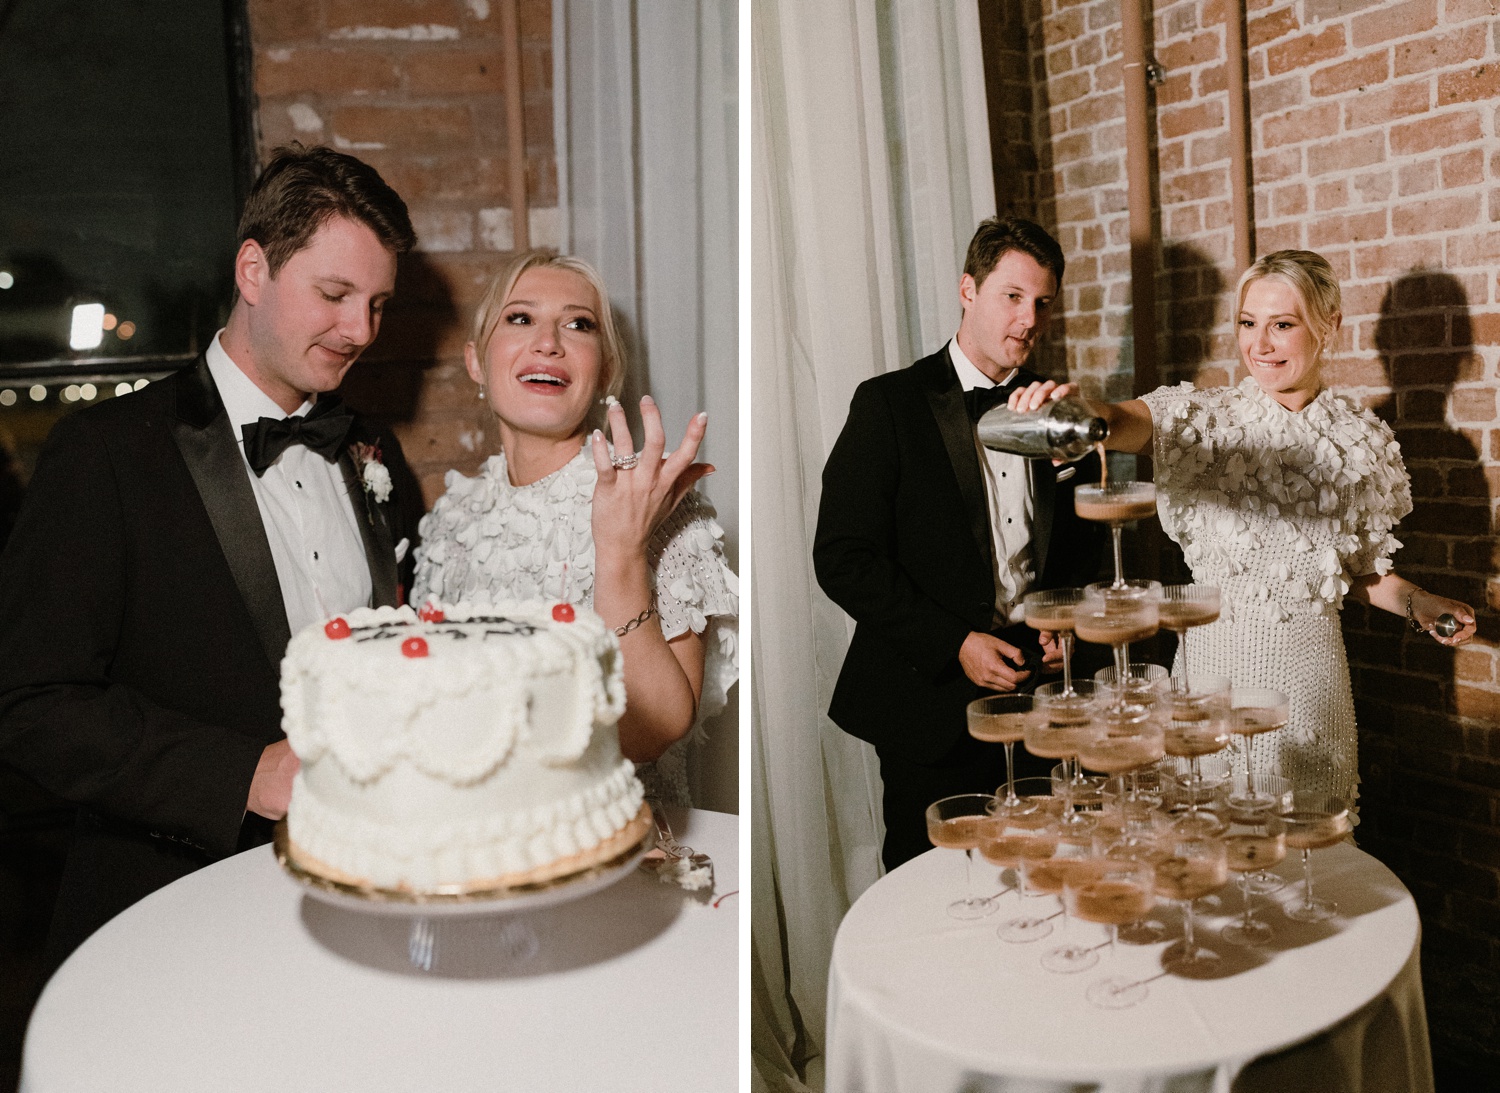 Bride and groom pouring into an espresso martini tower at their Houston wedding